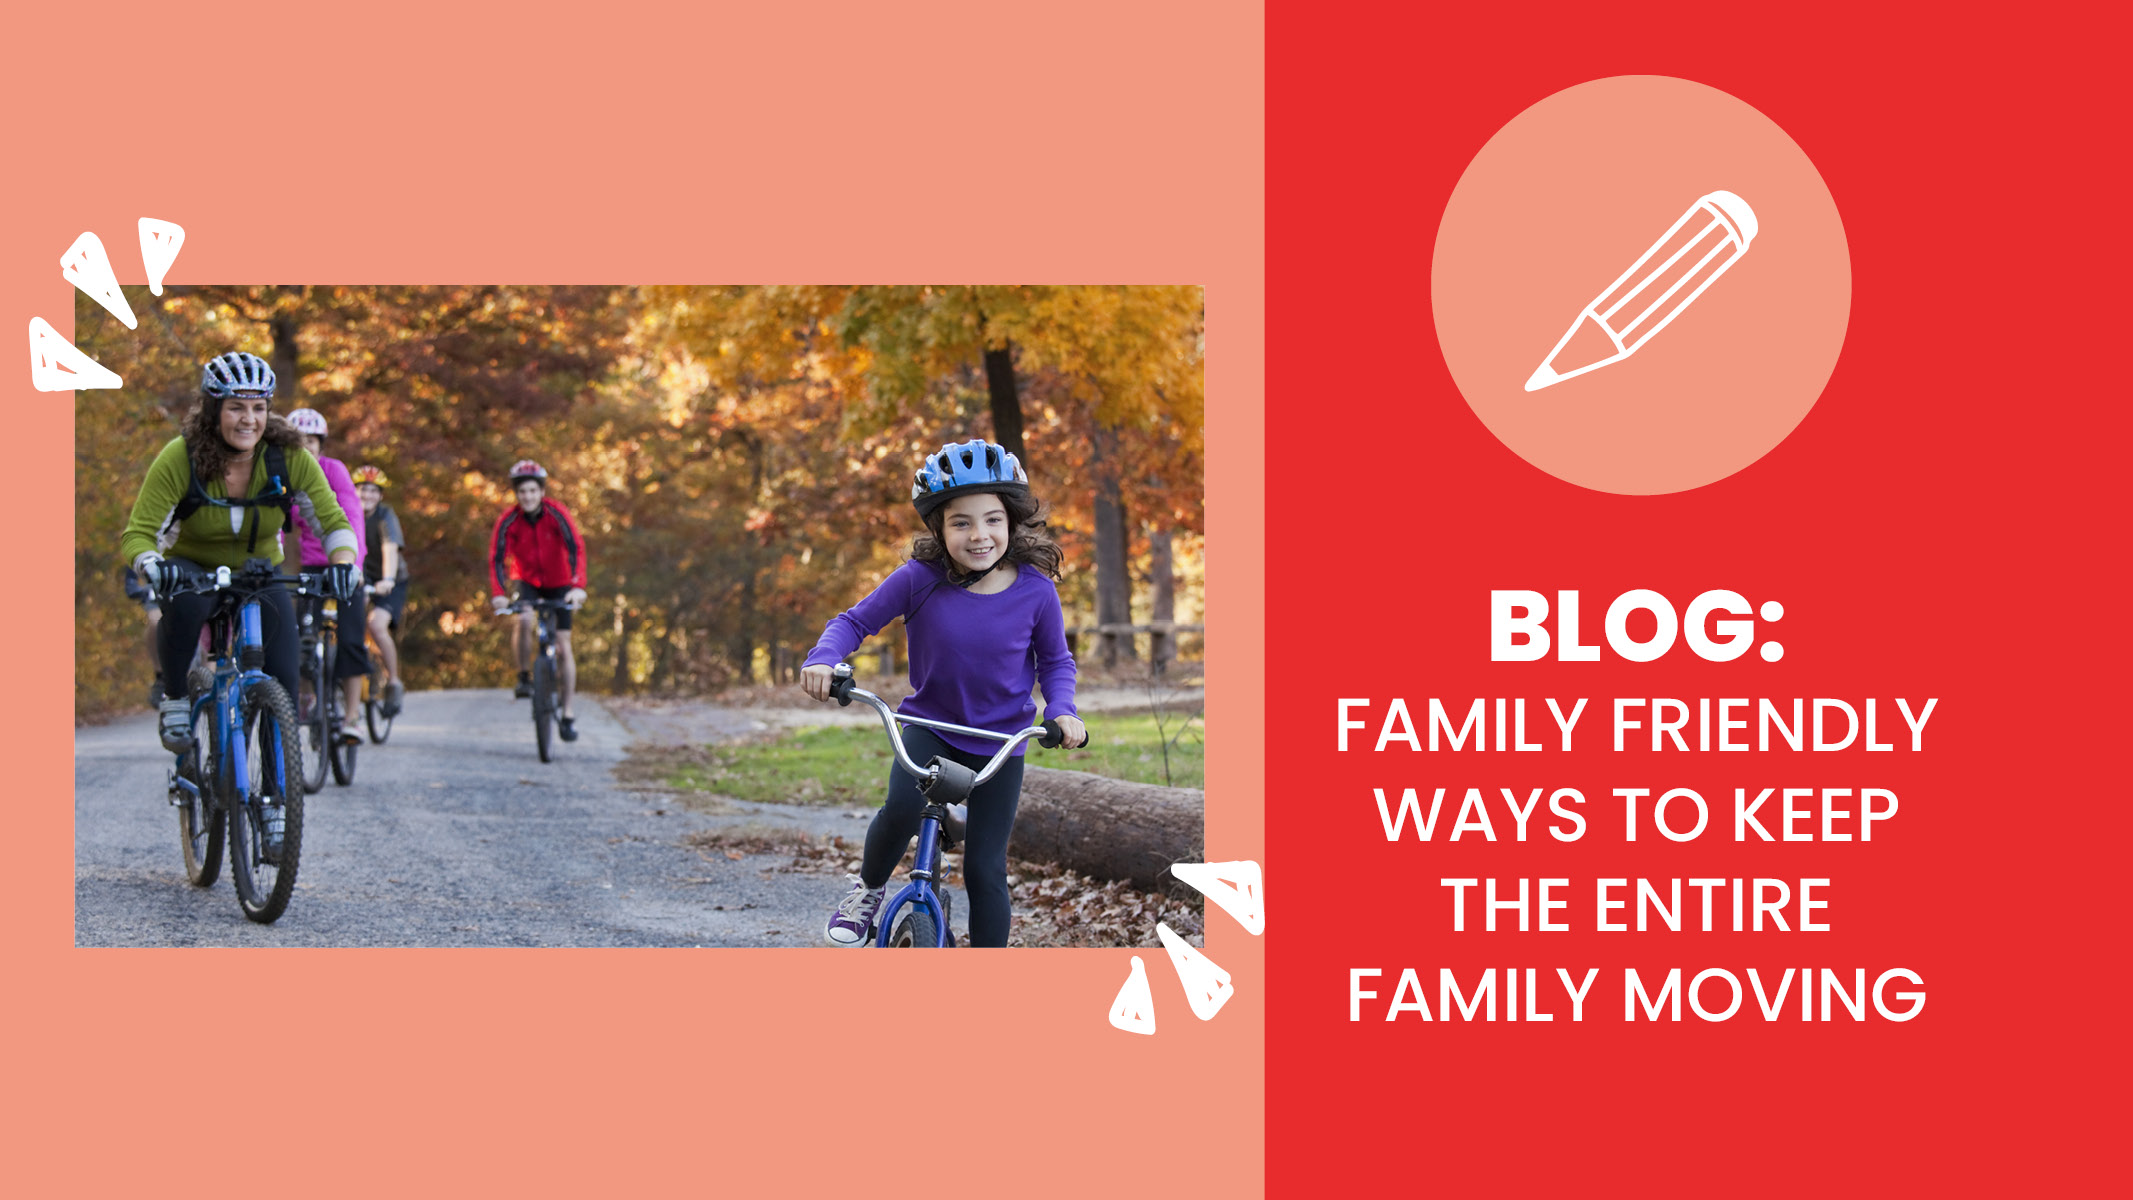 Parents and children ride their bikes on a fall day to exercise together